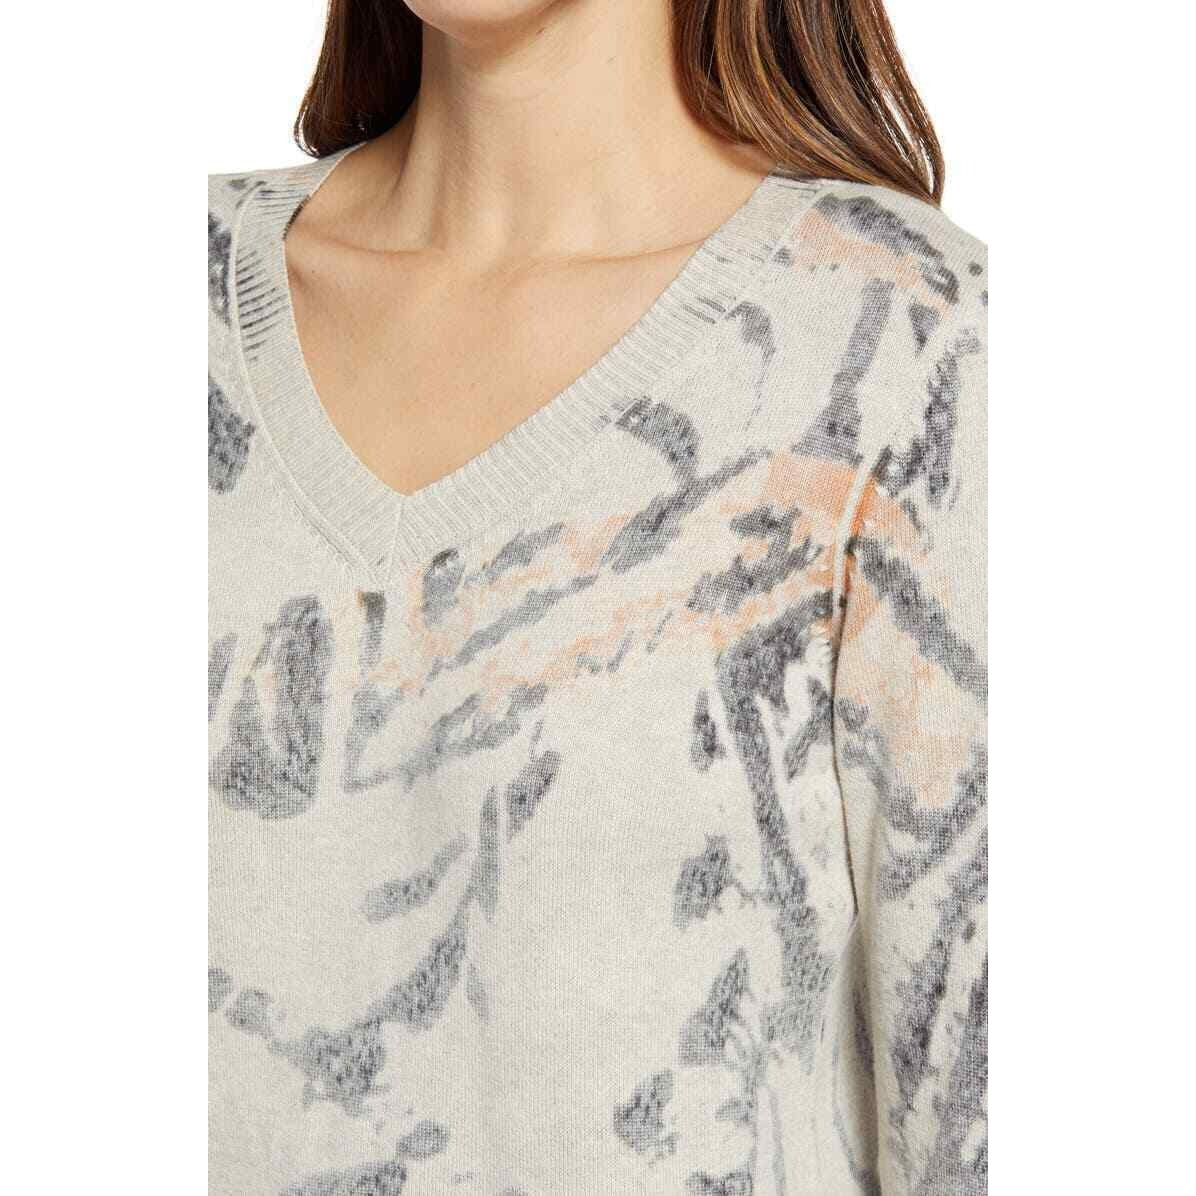 New Nic+Zoe M Foothill V-Neck Cotton Sweater Women's NWT